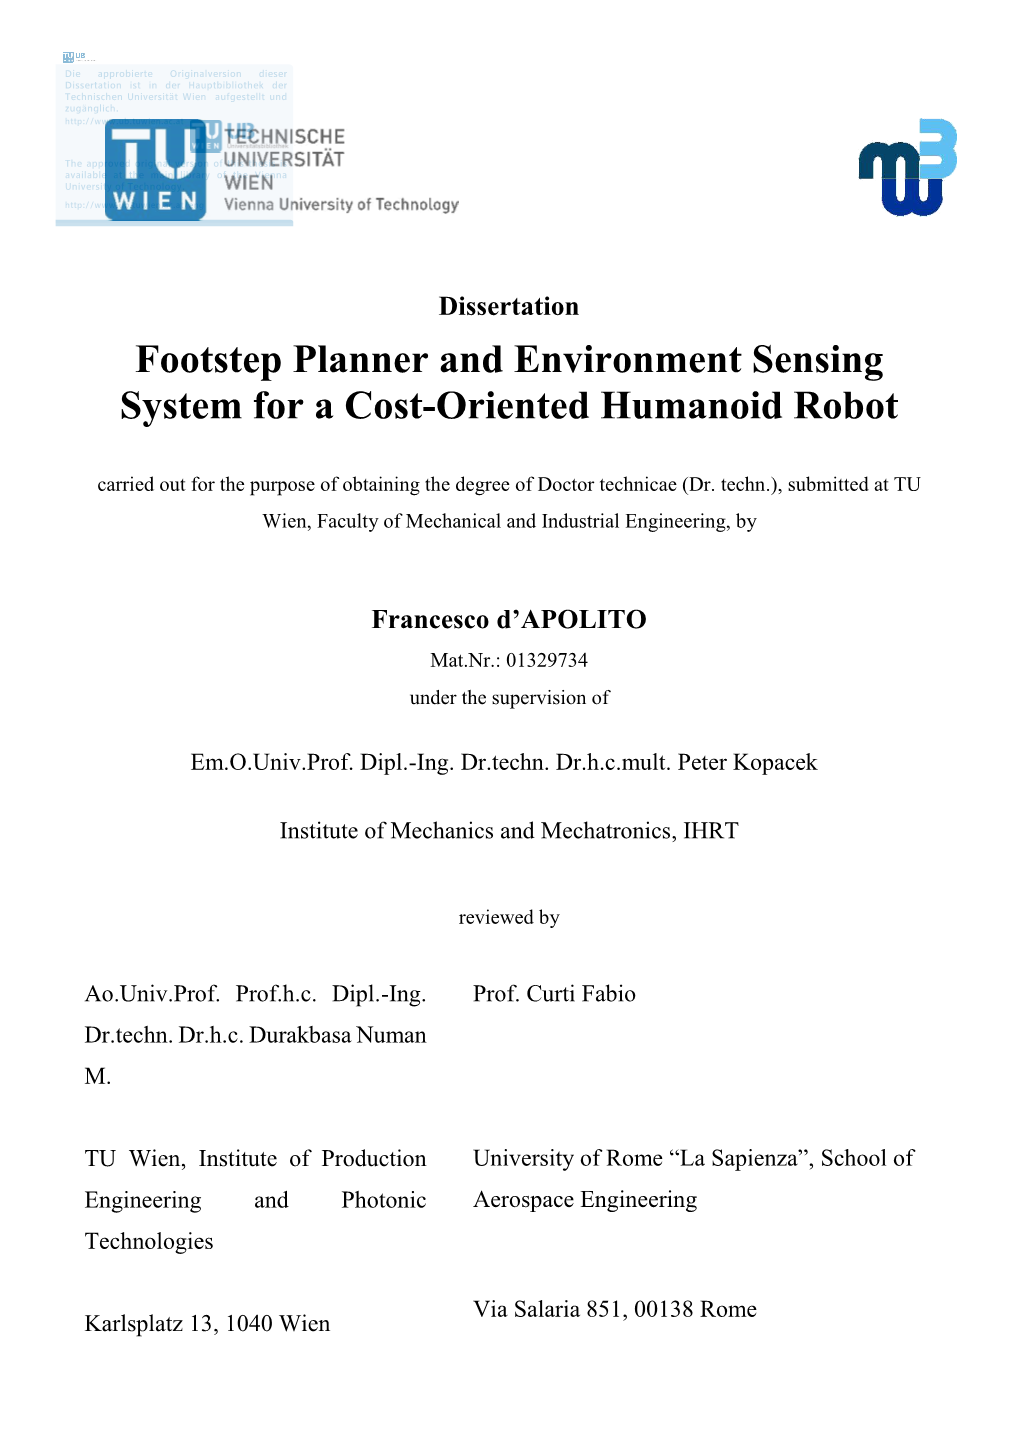 Footstep Planner and Environment Sensing System for a Cost-Oriented Humanoid Robot